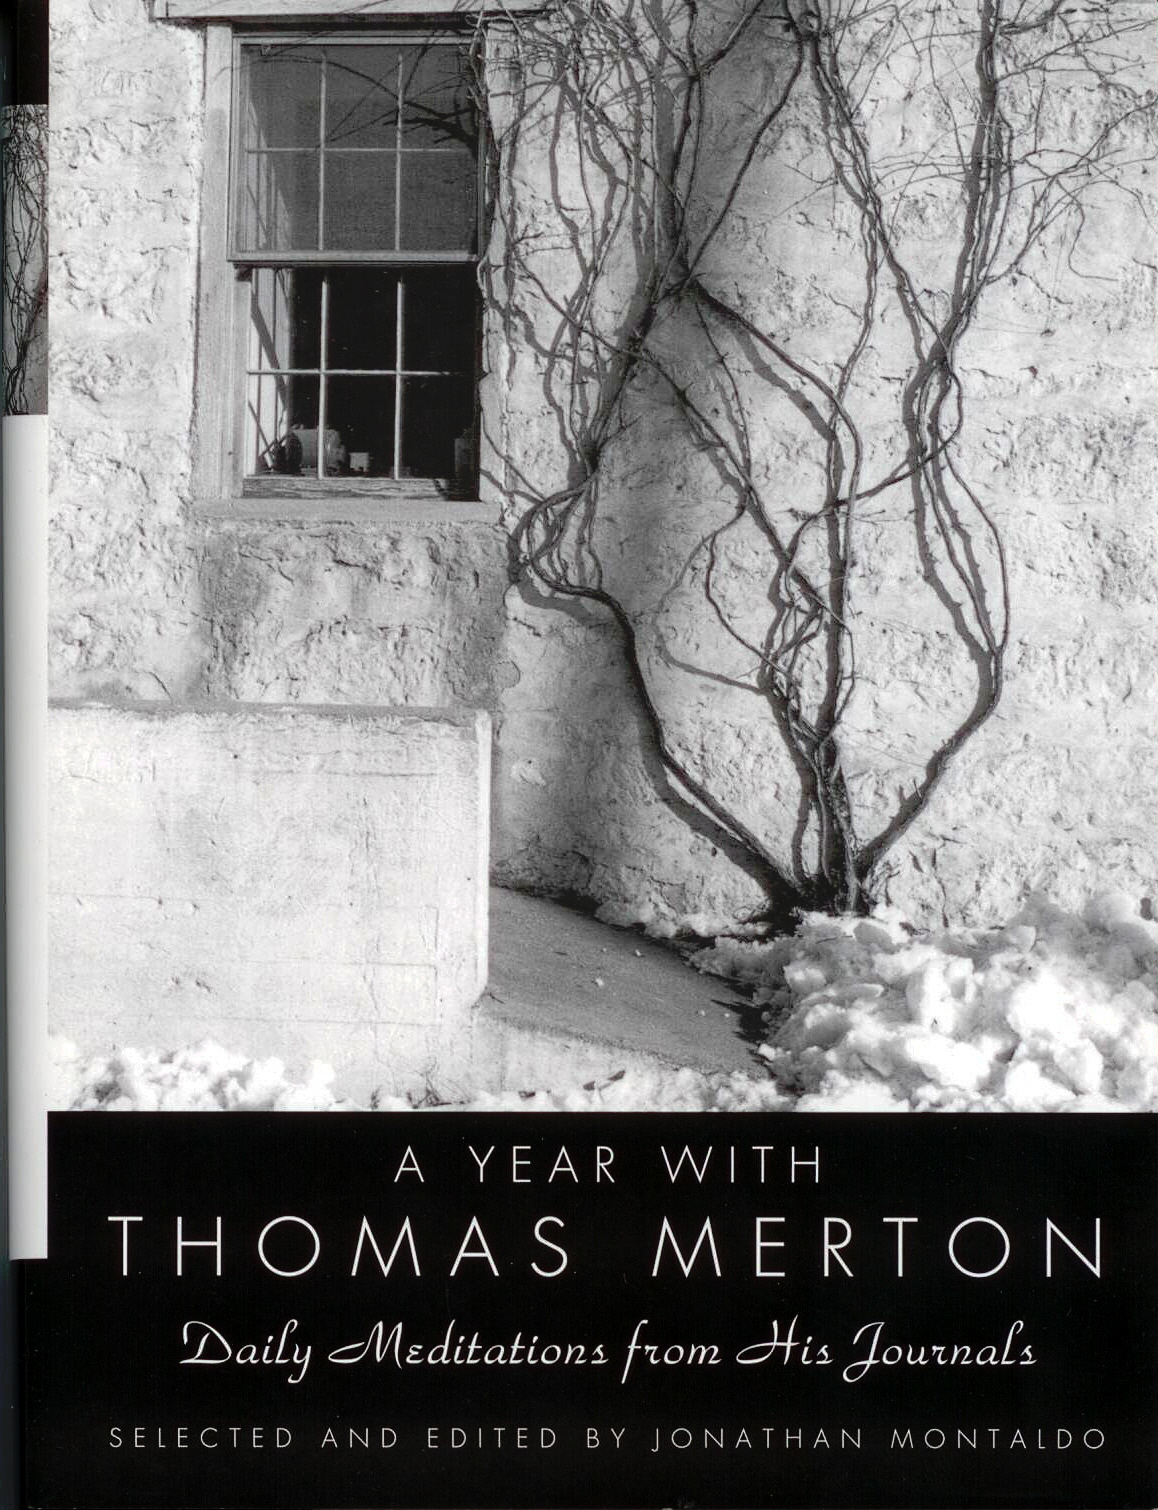 A Year With Thomas Merton, selected and edited by Jonathon Montaldo